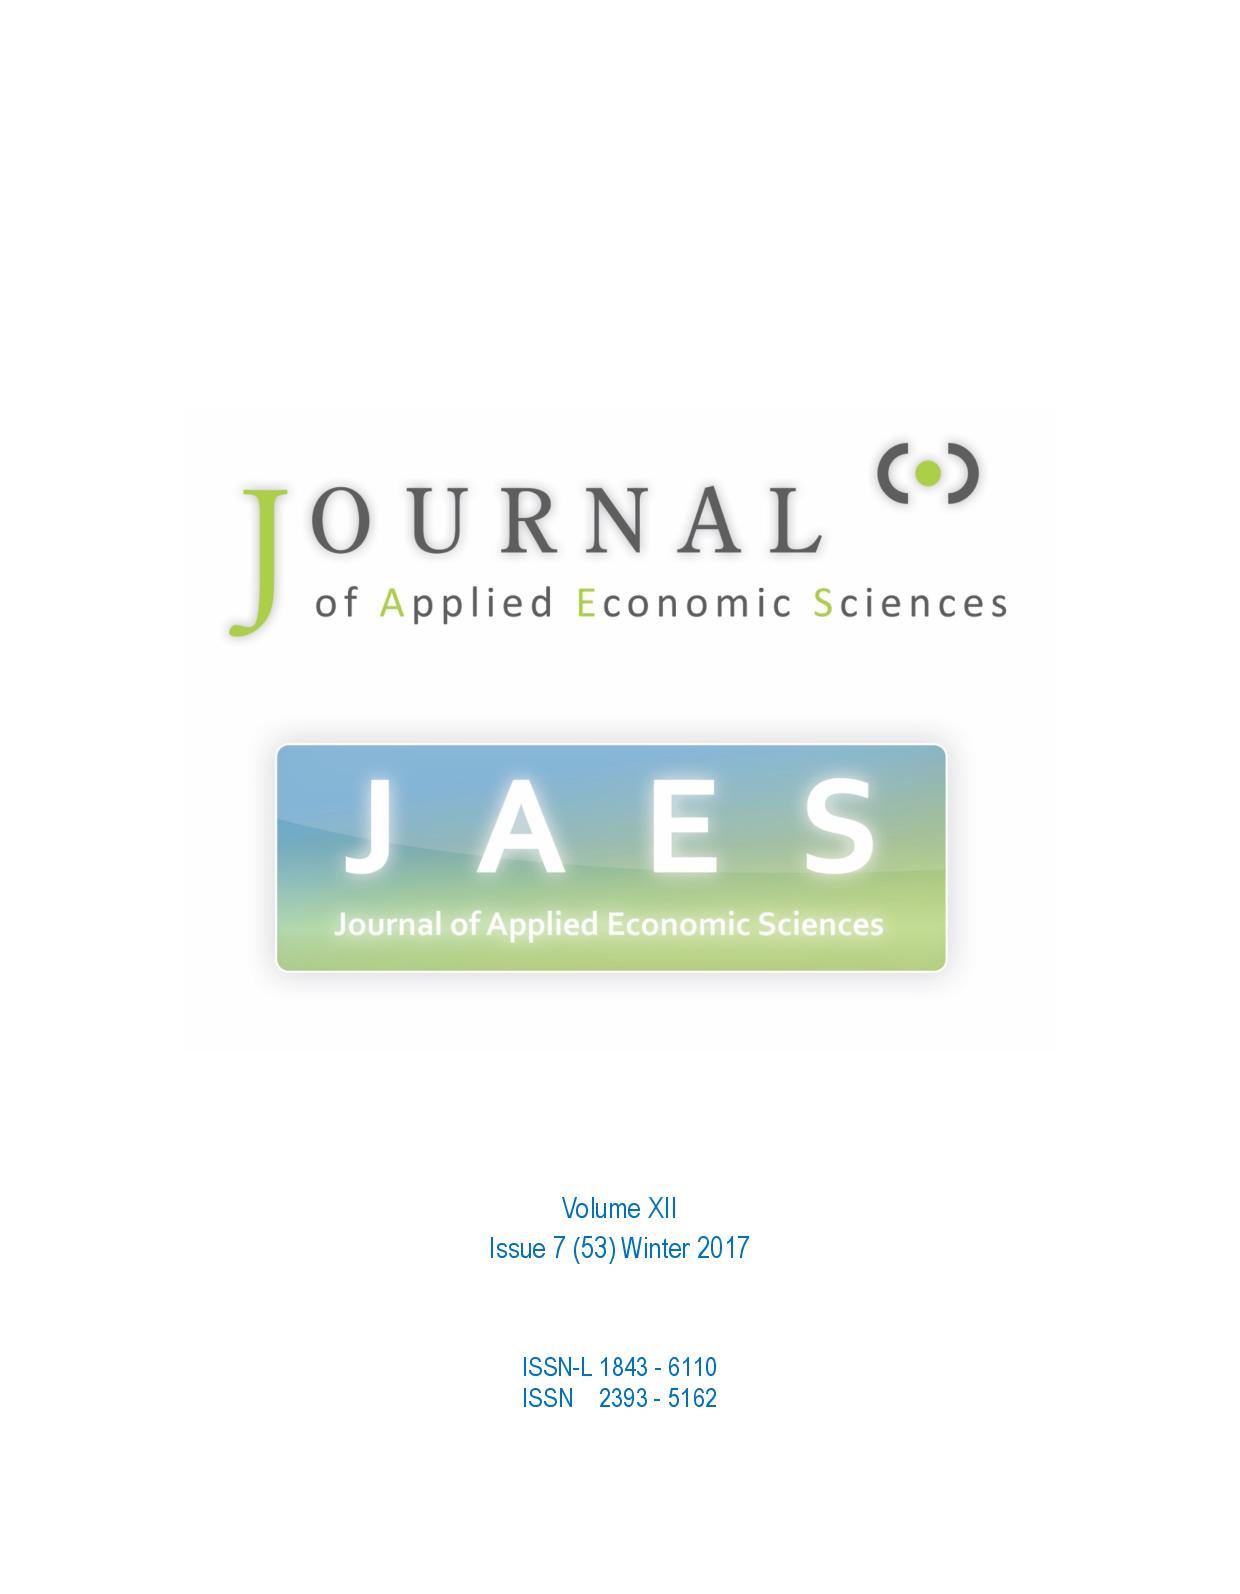 Study of the Relationship between Value Orientations and Consumer Preferences of Young Consumers in Russia